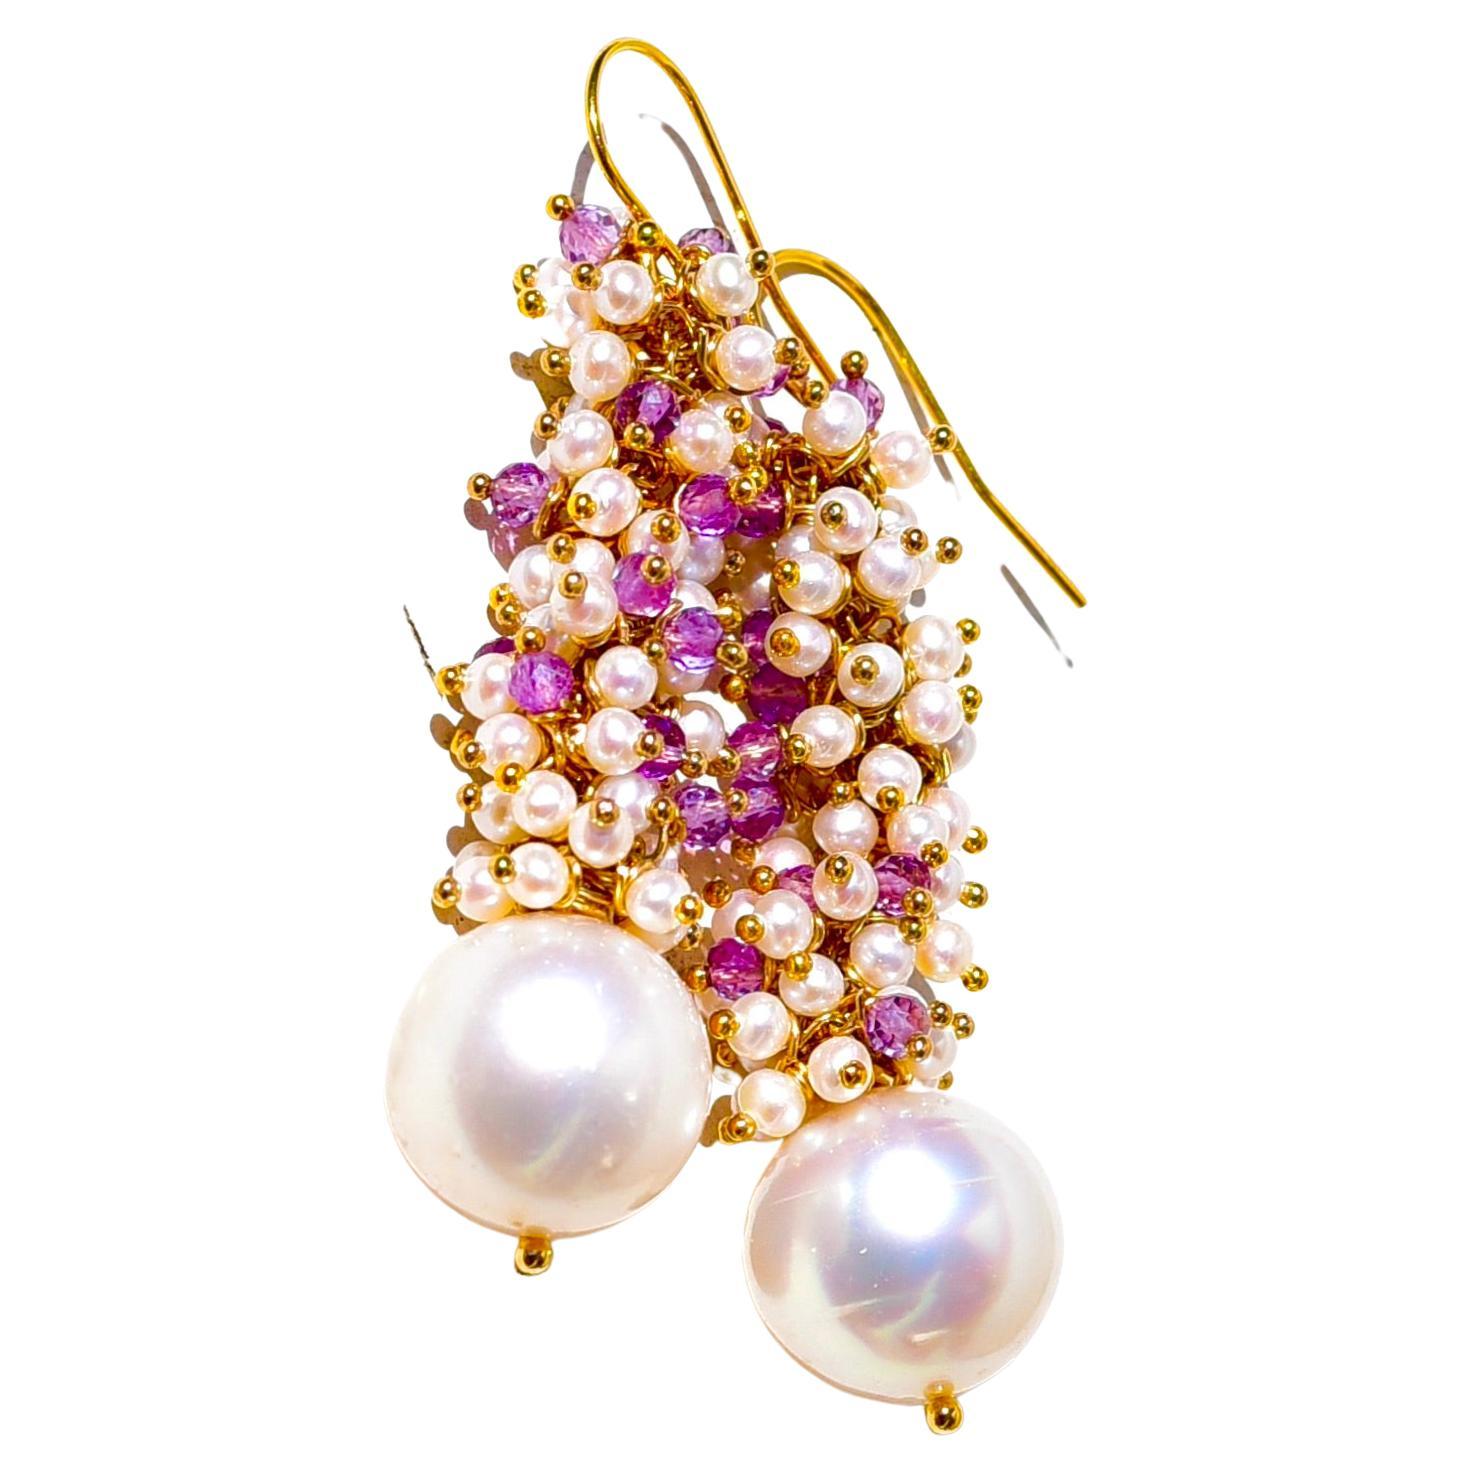 White Sea Cultured Pearl Earrings with Lavender Amethyst in 14K Yellow Gold